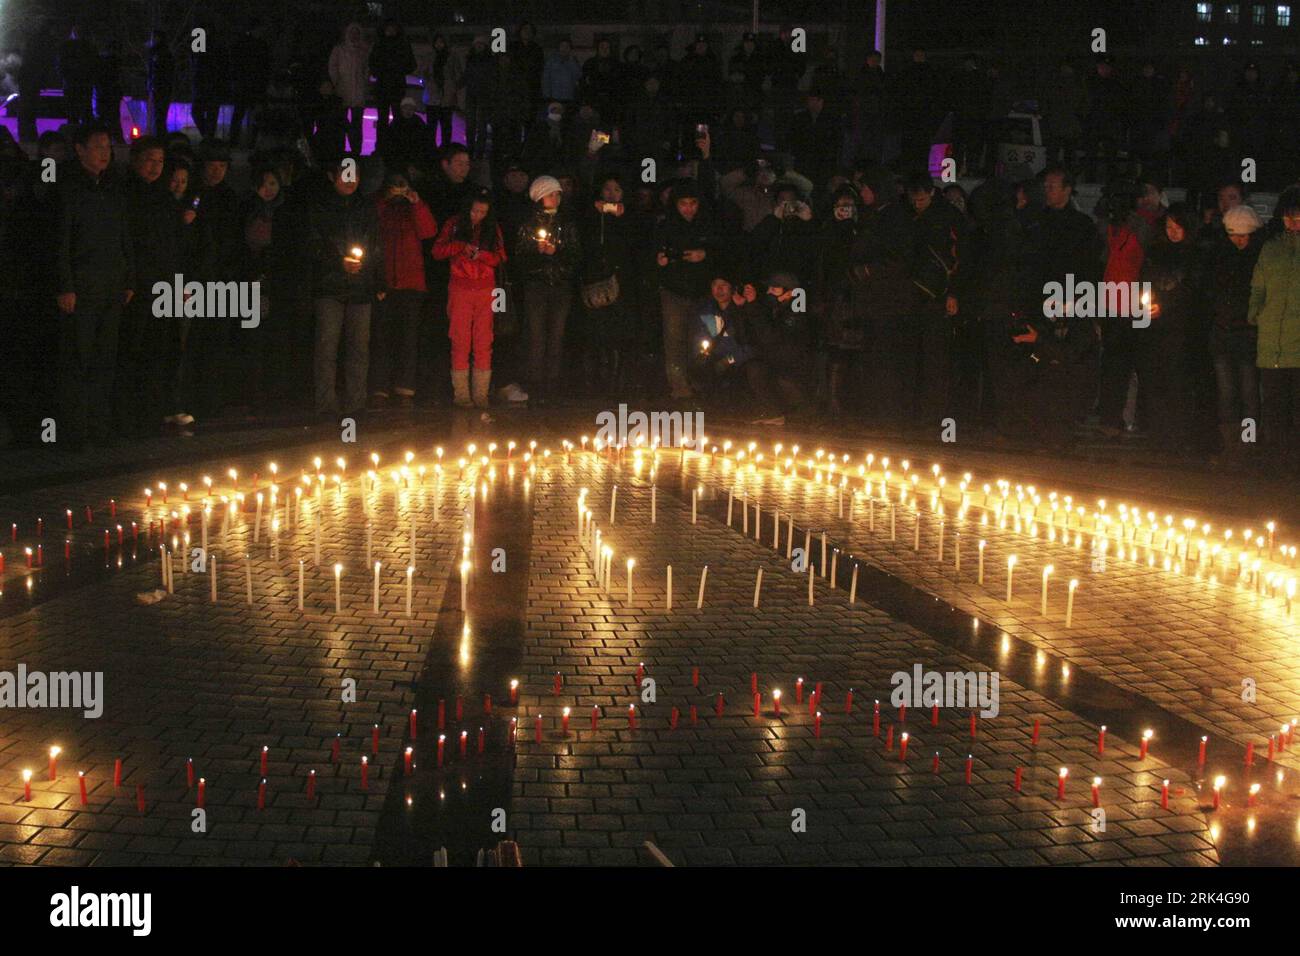 Bildnummer: 53628519  Datum: 25.11.2009  Copyright: imago/Xinhua (091126) -- HEGANG, Nov. 26, 2009 (Xinhua) -- pray for the dead miners of a coal mine accident at the Zhenxing Square in Hegang City, northeast China s Heilongjiang Province, Nov. 25, 2009. Hundreds of gathered at the square to mourn for the miners dead in the accident occurring in the Xinxing Coal Mine on Nov. 21. An explosion in the mine caused 92 miners dead and 16 others still missing. (Xinhua/Bai Changhai) (zgp) CHINA-HEILONGJIANG-COAL MINE ACCIDENT-MOURNING (CN) PUBLICATIONxNOTxINxCHN Trauer Gedenken Minenunfall Minenunglüc Stock Photo